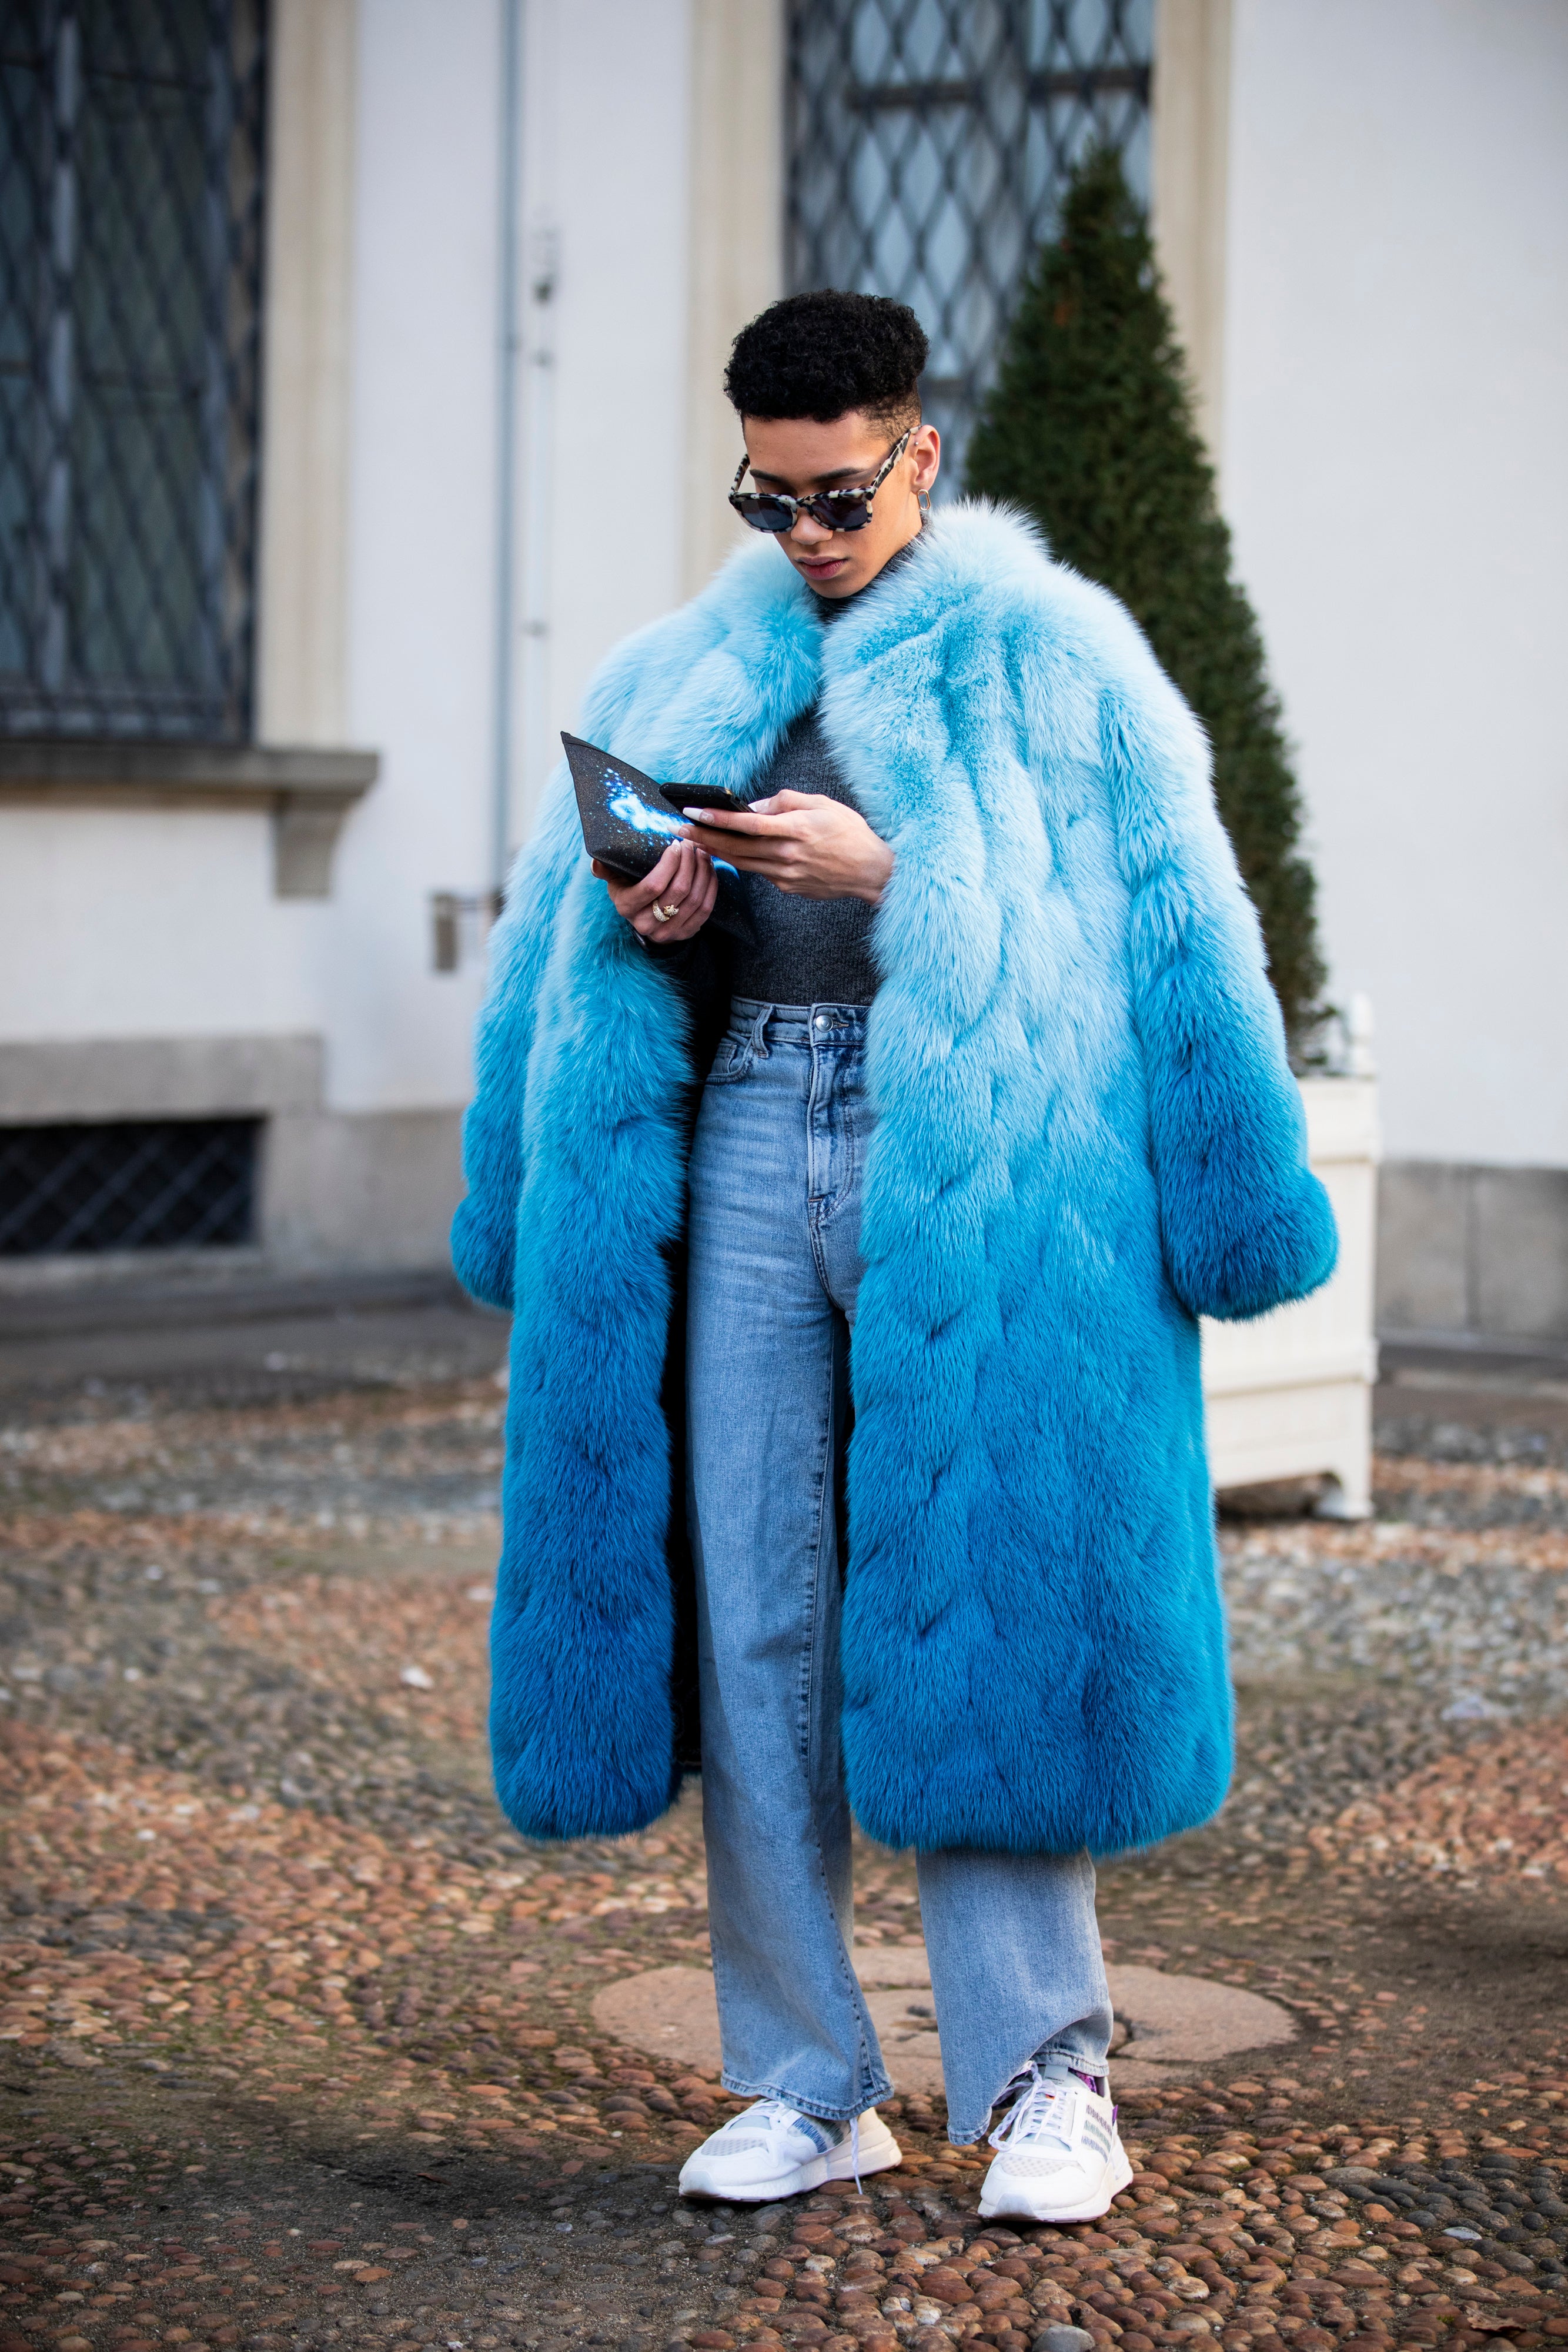 The Best Street Style Looks From Europe, With Love | Essence